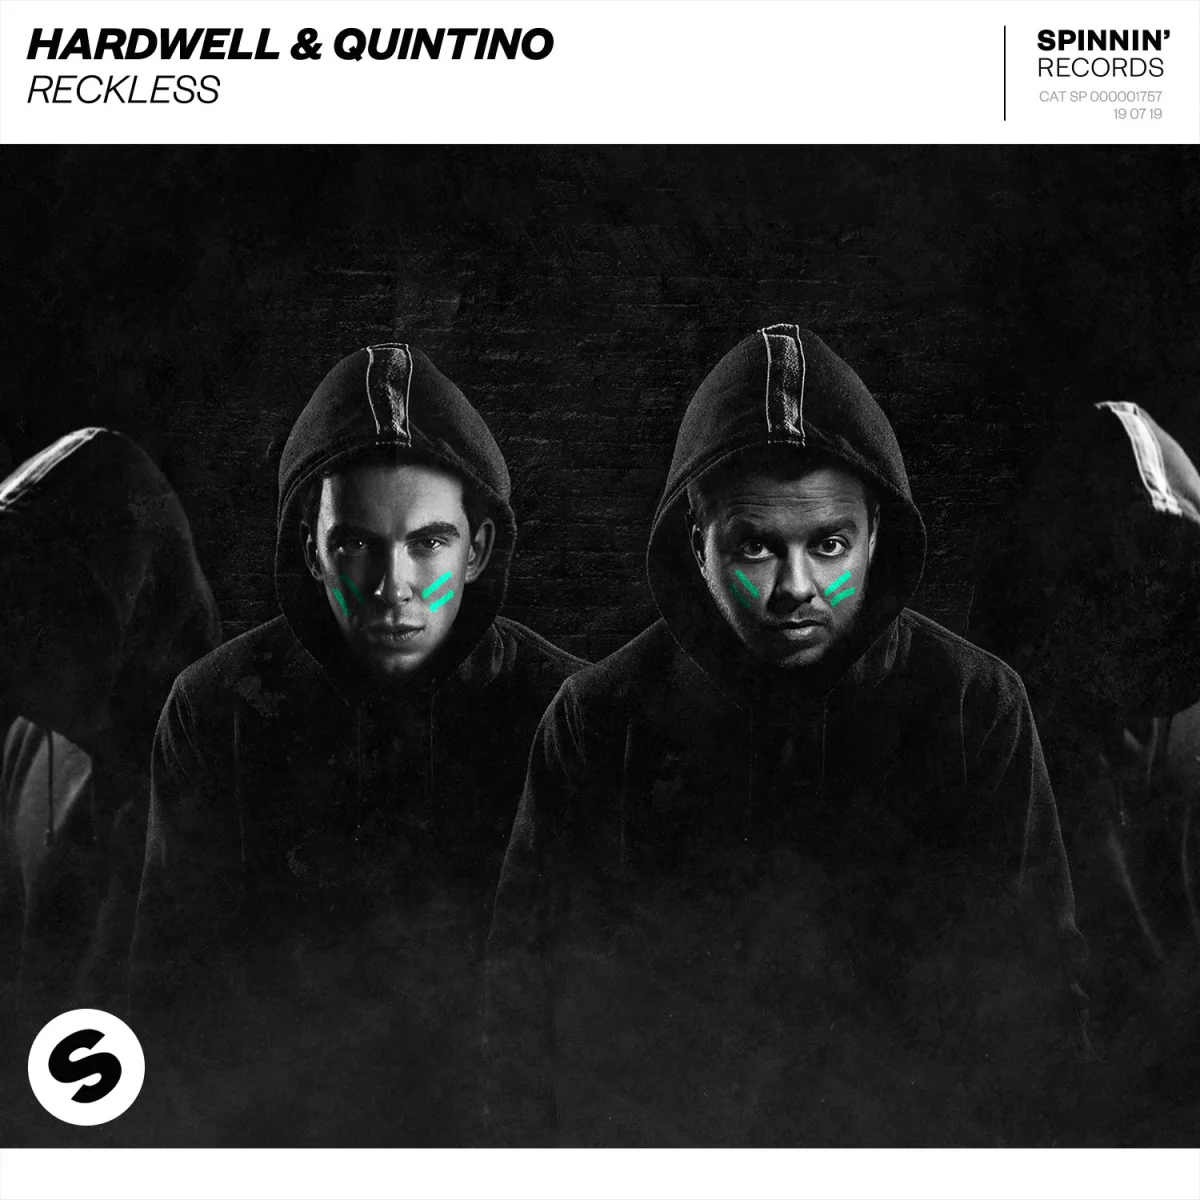 Reckless - Hardwell⁠ Quintino⁠ 